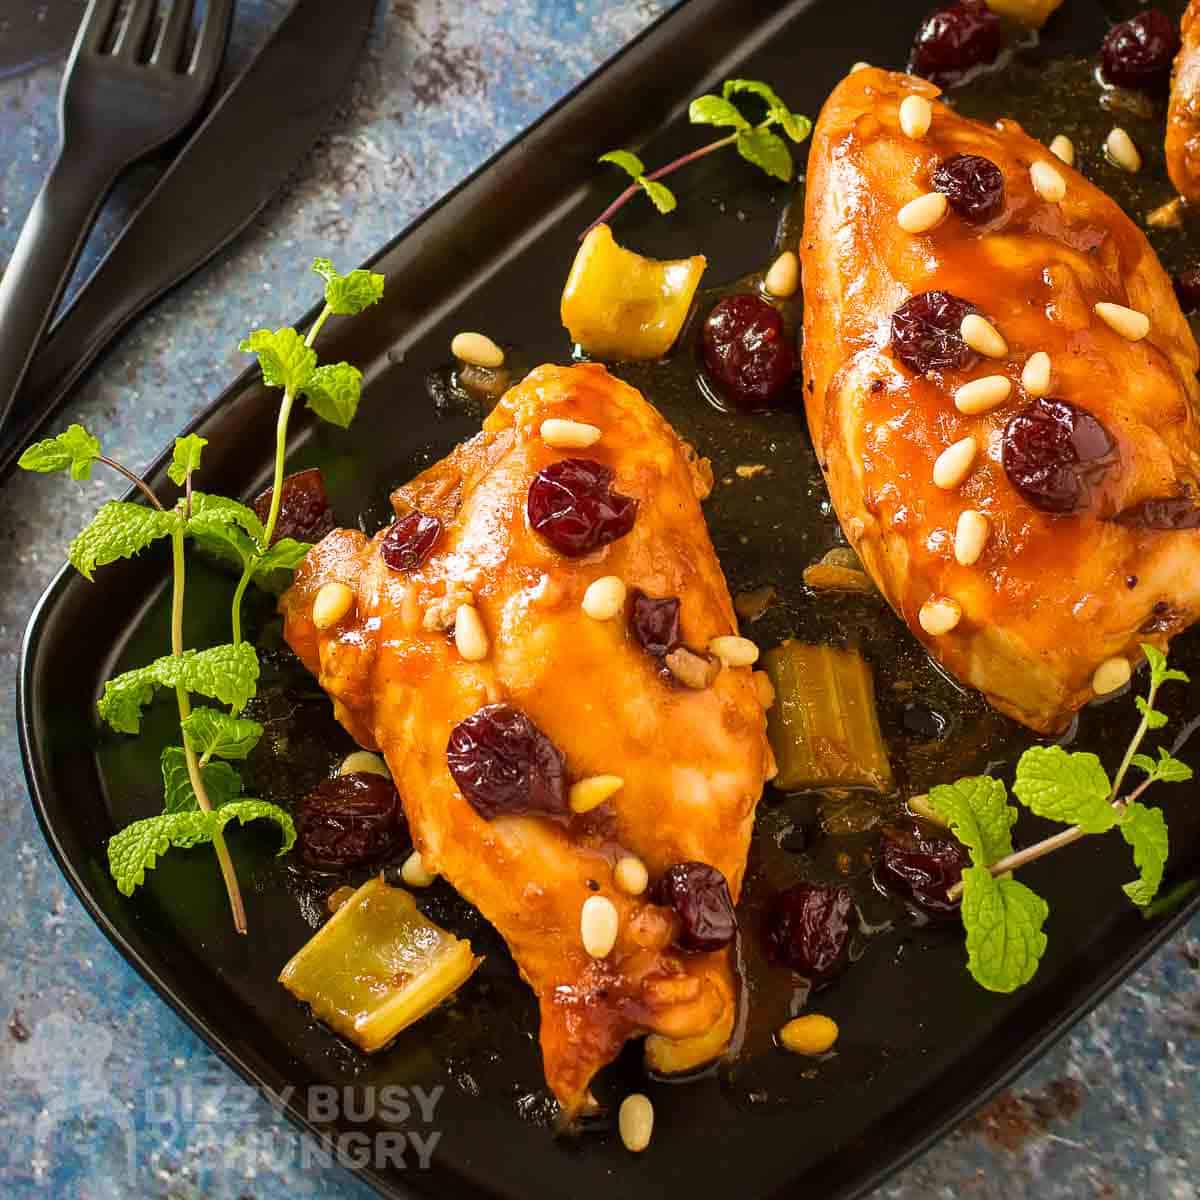 Overhead shot of three pieces of cranberry chicken garnished with cranberries and herbs on a black plate with cutlery on the side.